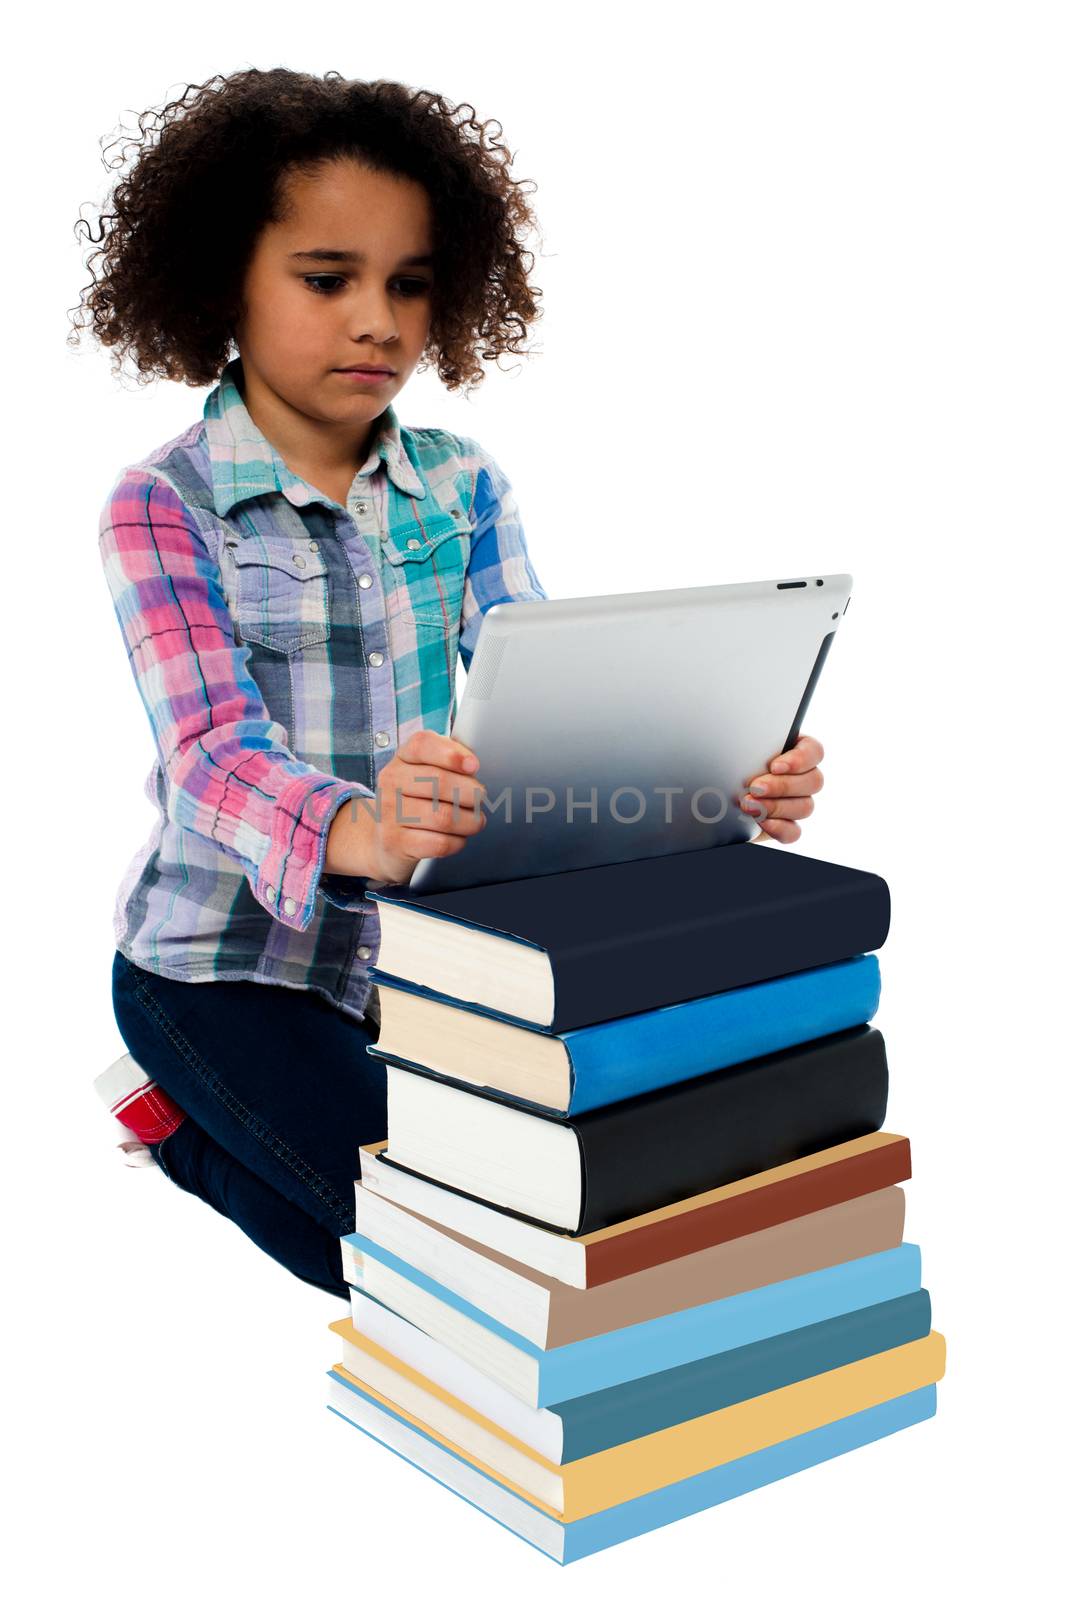 Cute girl with stack of books and tablet pc